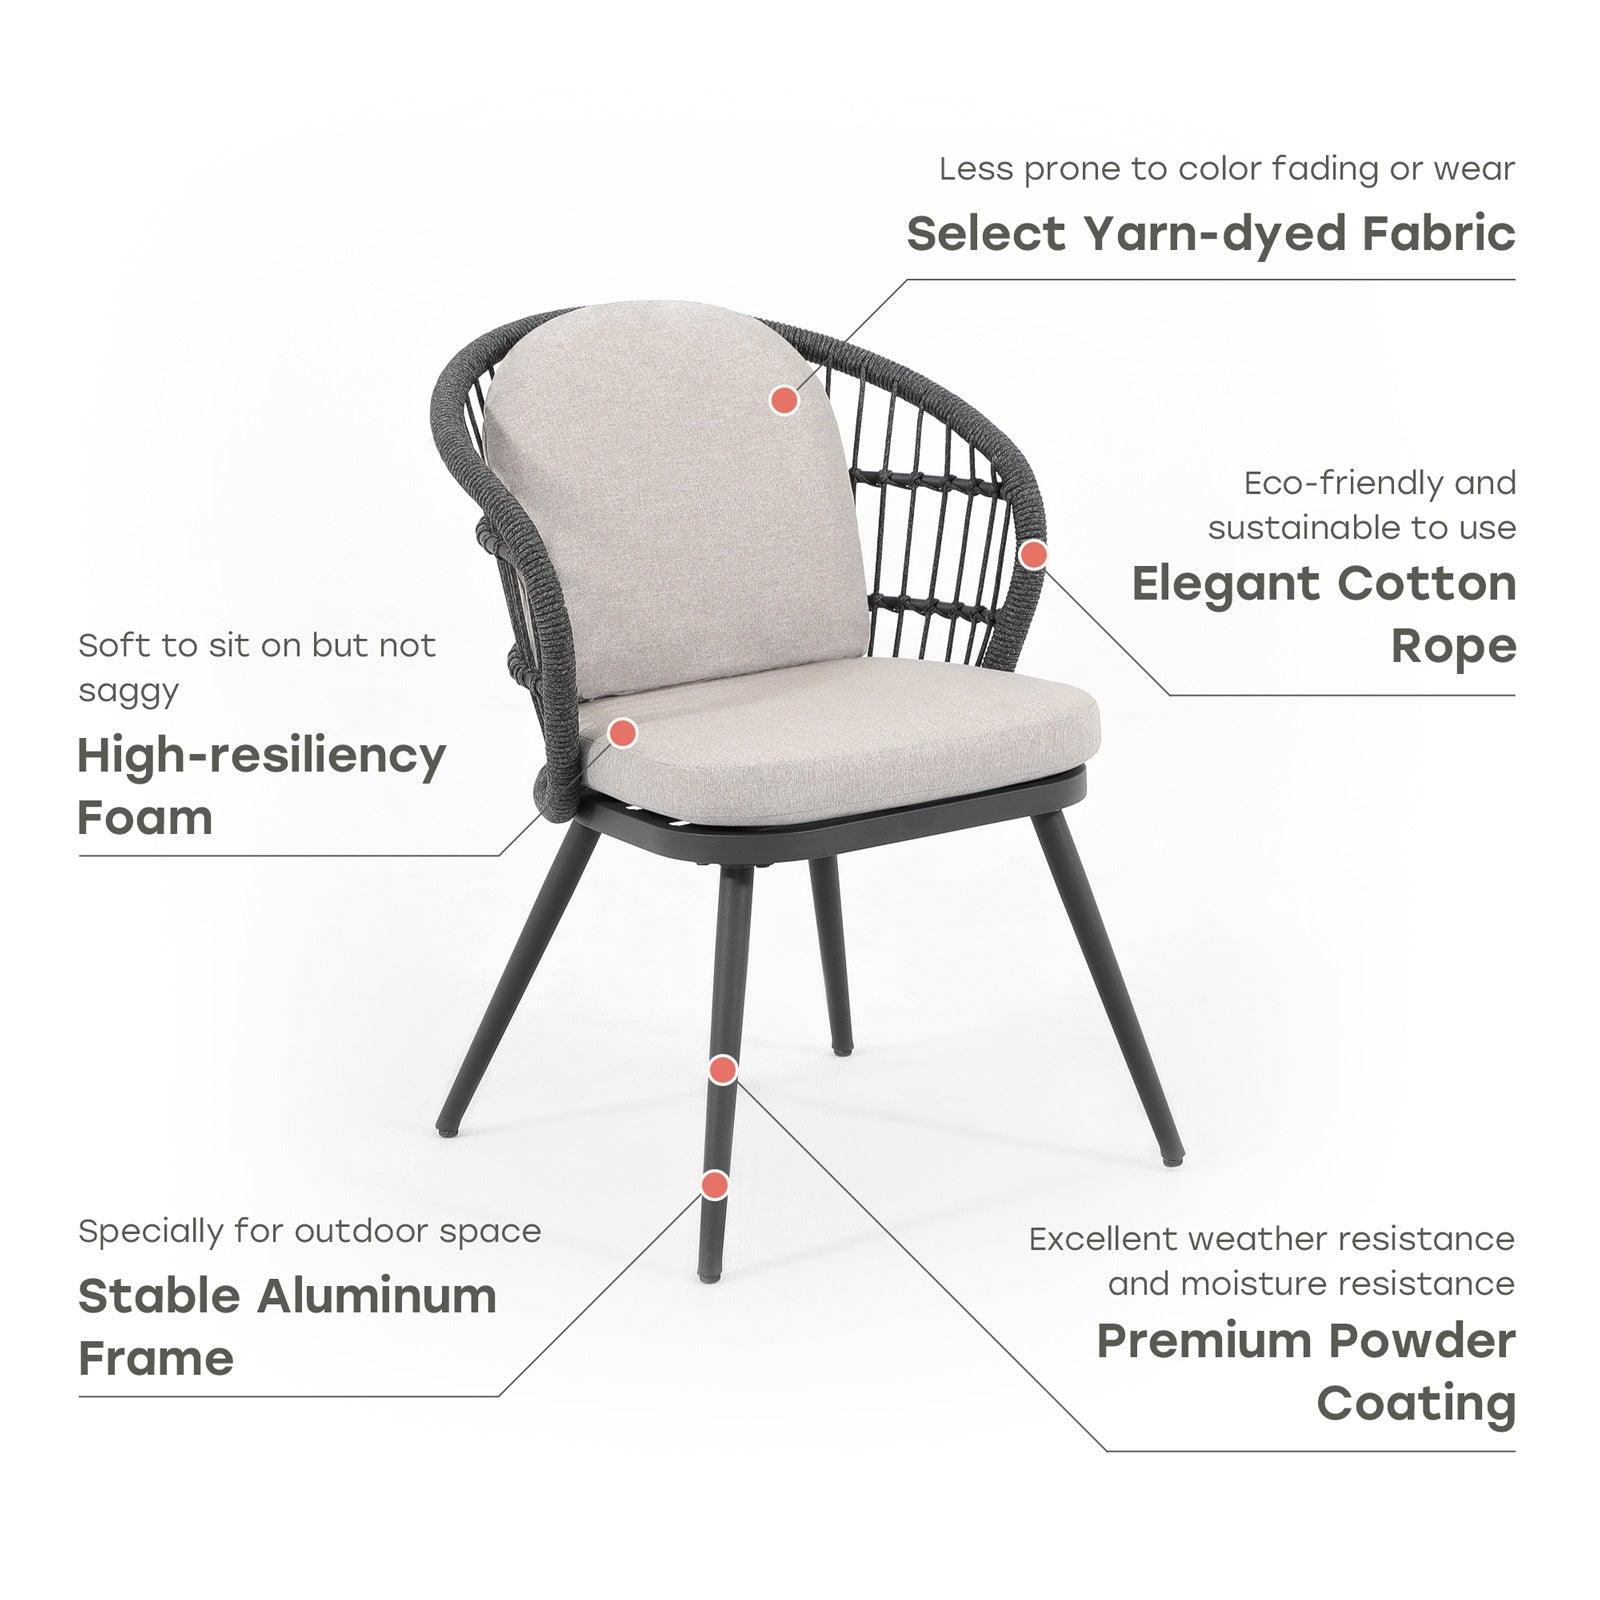 Comino dark grey aluminum frame dining chair with backrest rope design and light grey cushions, Product Info- Jardina Furniture